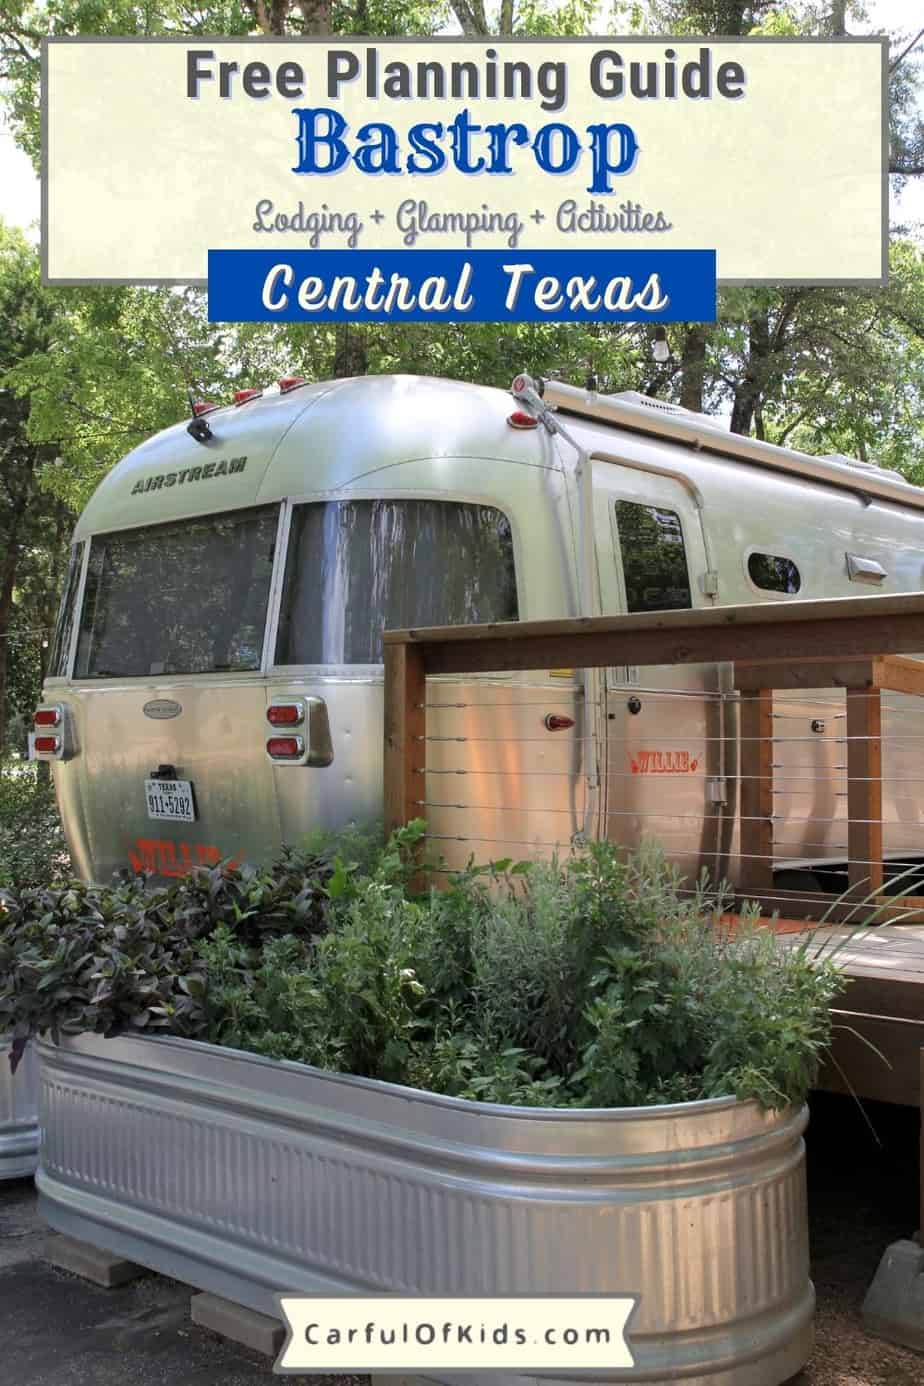 Bastrop, Texas, less than an hour from Austin, offers an outdoor destination with two Texas State Parks, three regional parks, paddling trails along the Colorado River, a dual zip line, a zoo, along with a vibrant and historic downtown. Get the details to plan your small town getaway to Bastrop in this guide with lodging and dining recommendations. What to do in Bastrop Texas | State Parks close to Austin | Where to stay in Bastrop | Small Town Texas getaways #Bastrop #Texas 